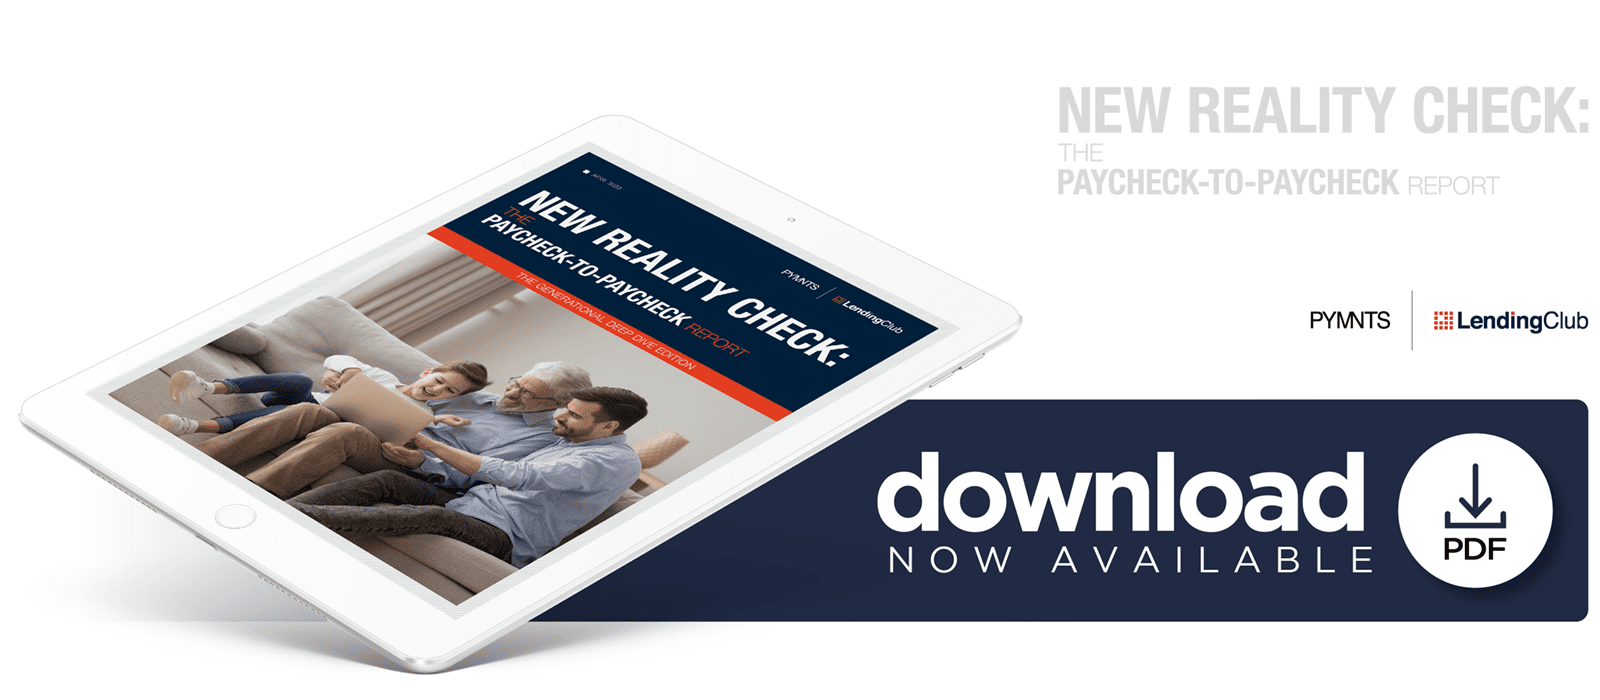 Download the PYMNTS and LendingClub April 2023 "New Reality Check: The Paycheck-To-Paycheck Report - The Generational Deep Dive Edition"